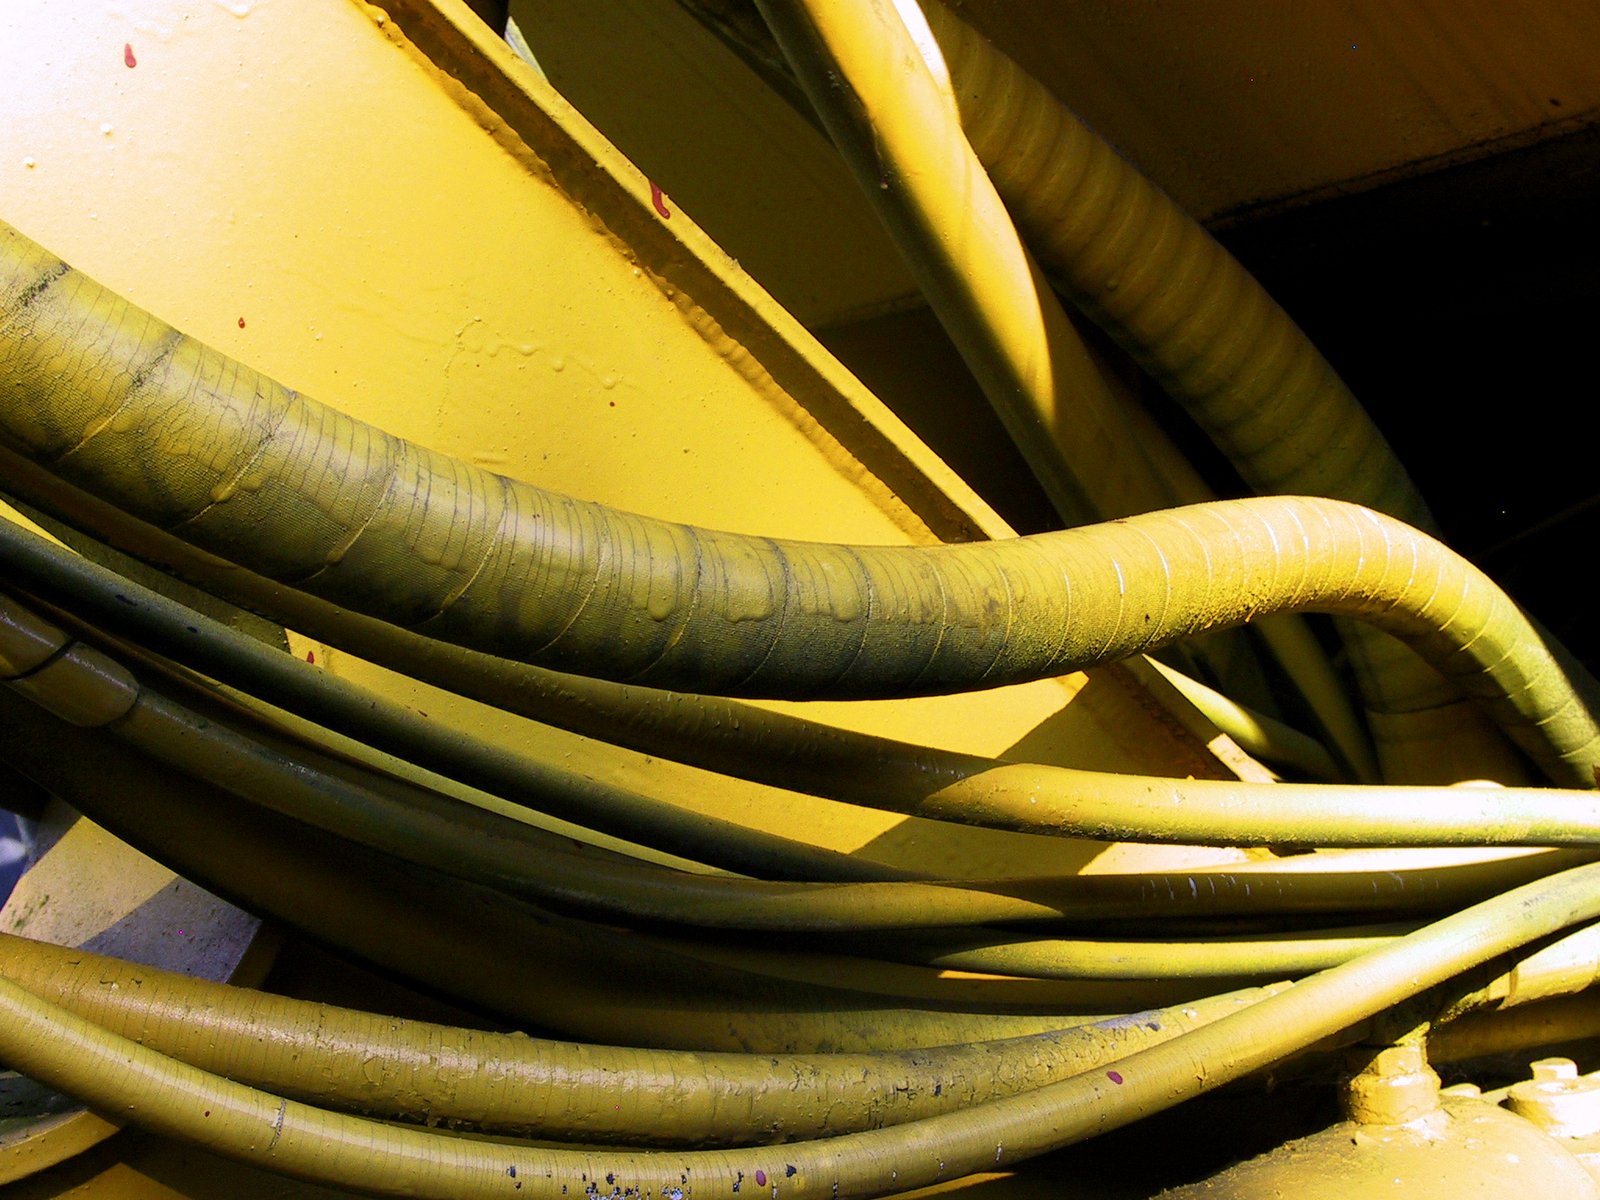 closeup of multiple hoses all connected together